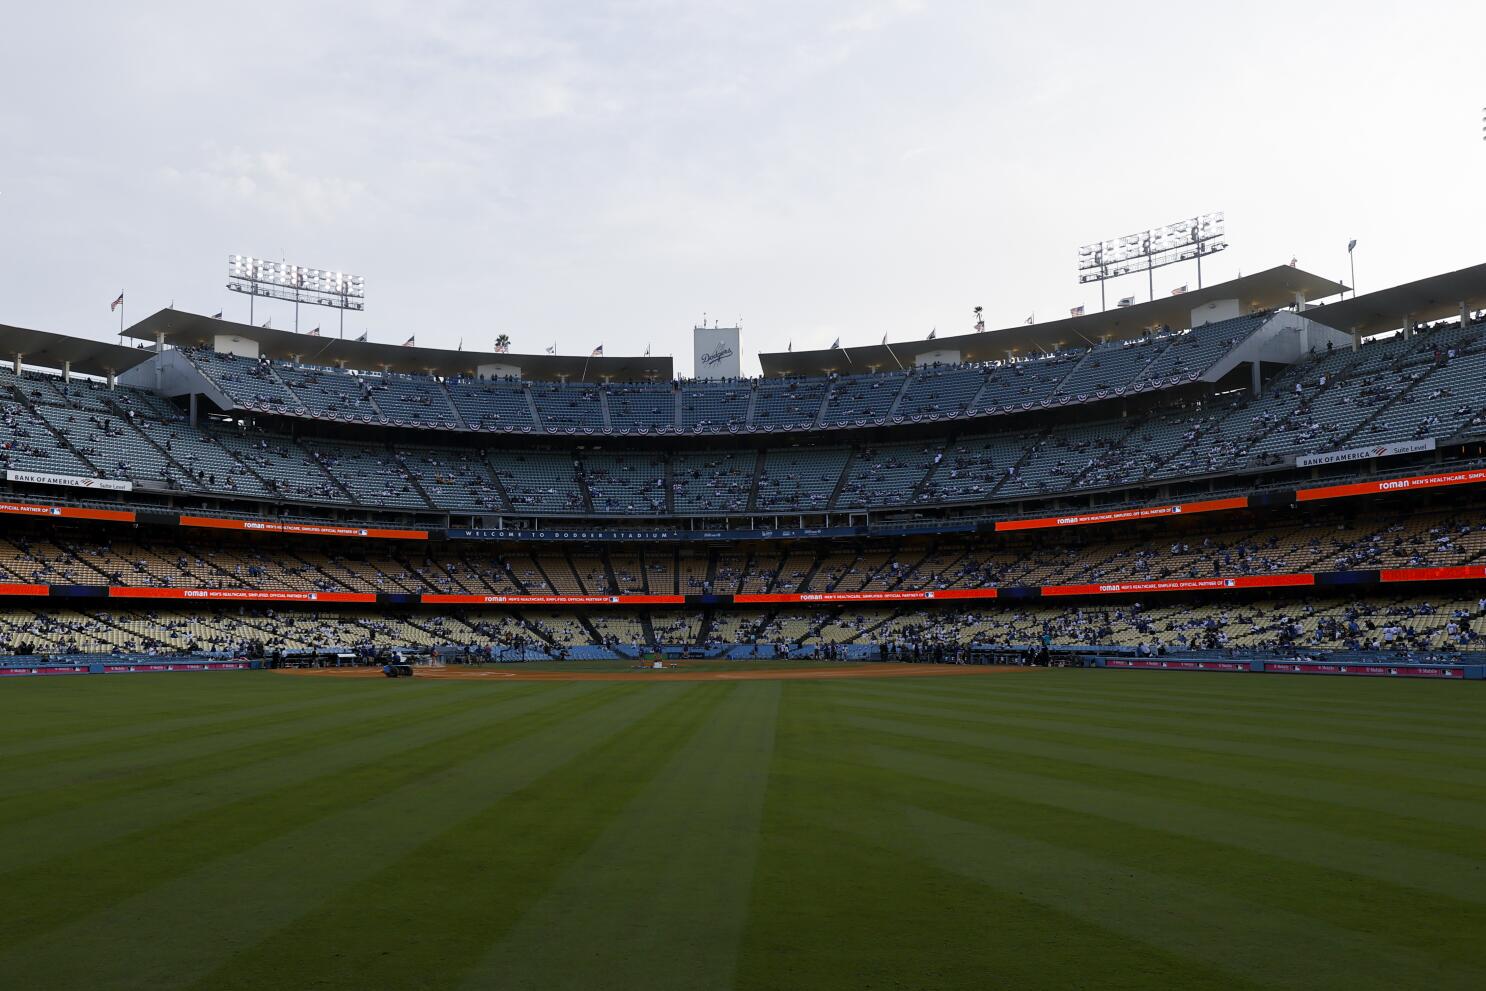 How to Save Money and Time at Dodgers Stadium